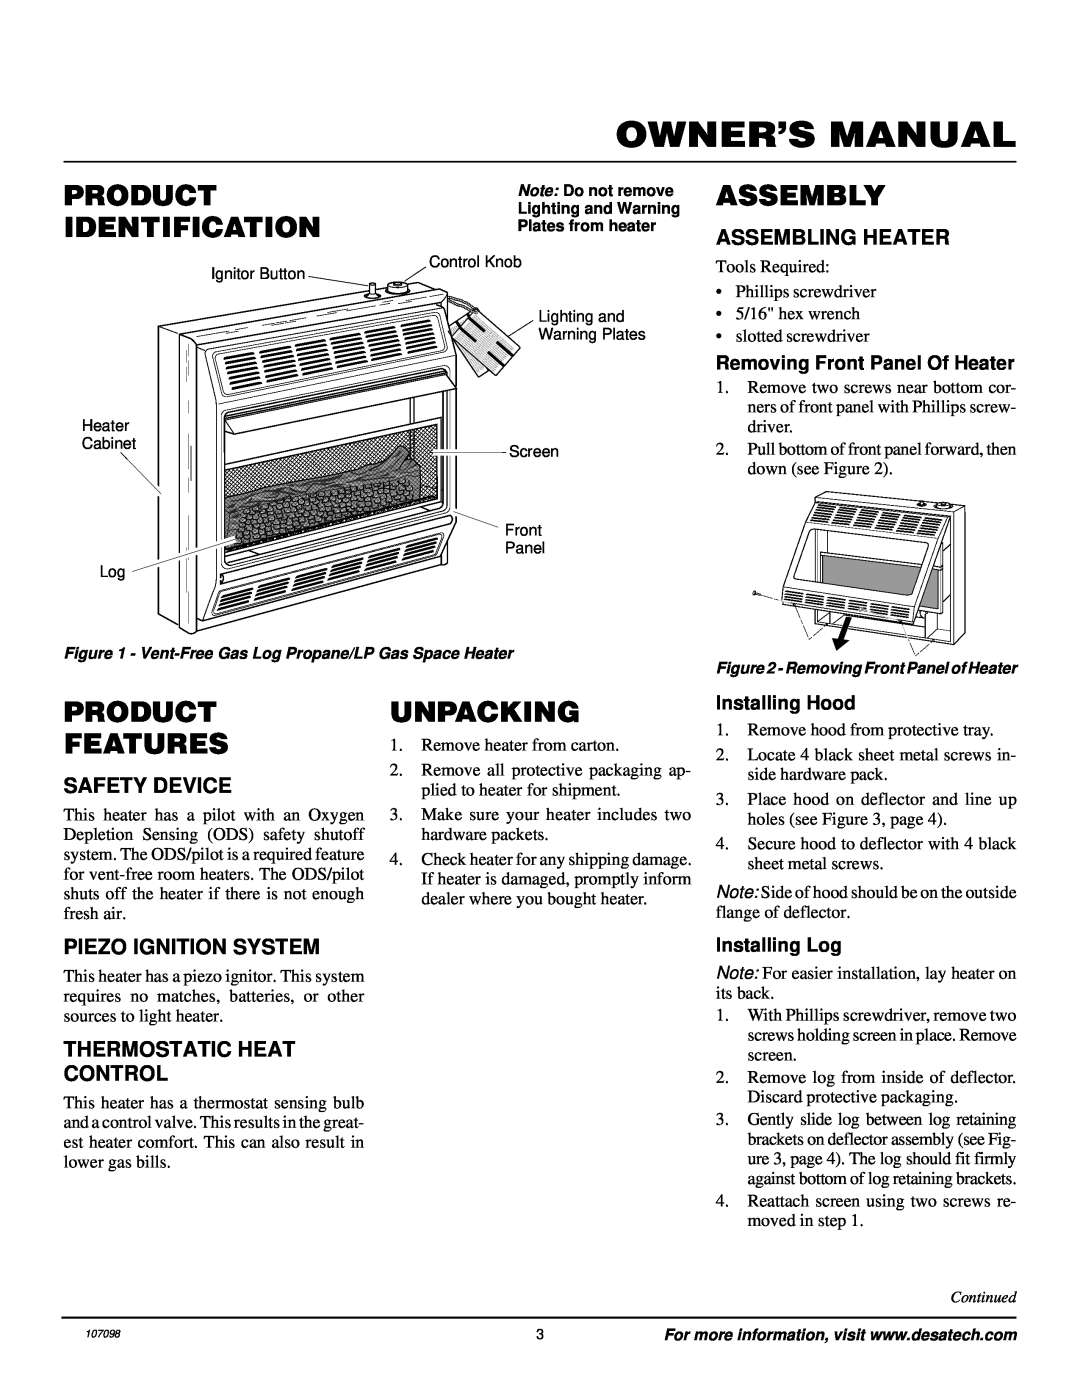 Vanguard Heating VMH3000TPA Product Identification, Assembly, Product Features, Unpacking, Assembling Heater, Continued 